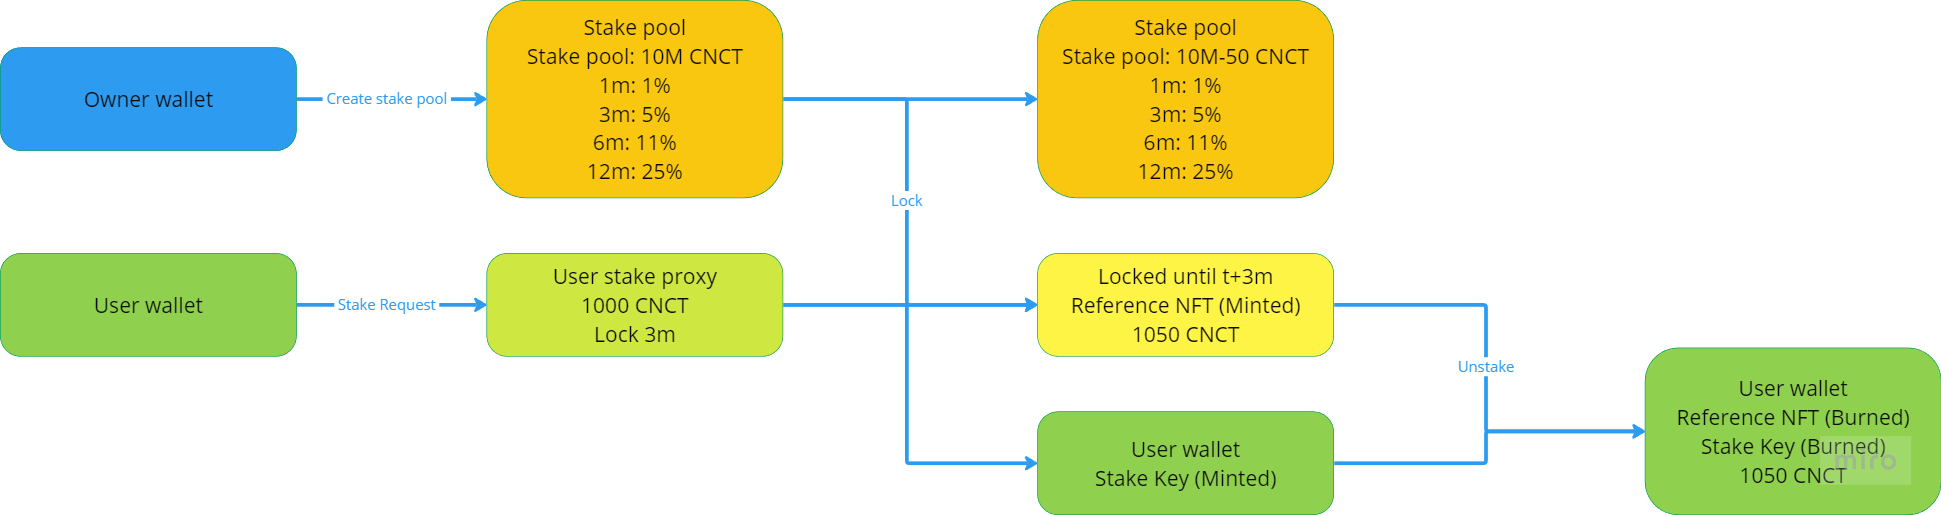 Staking overview